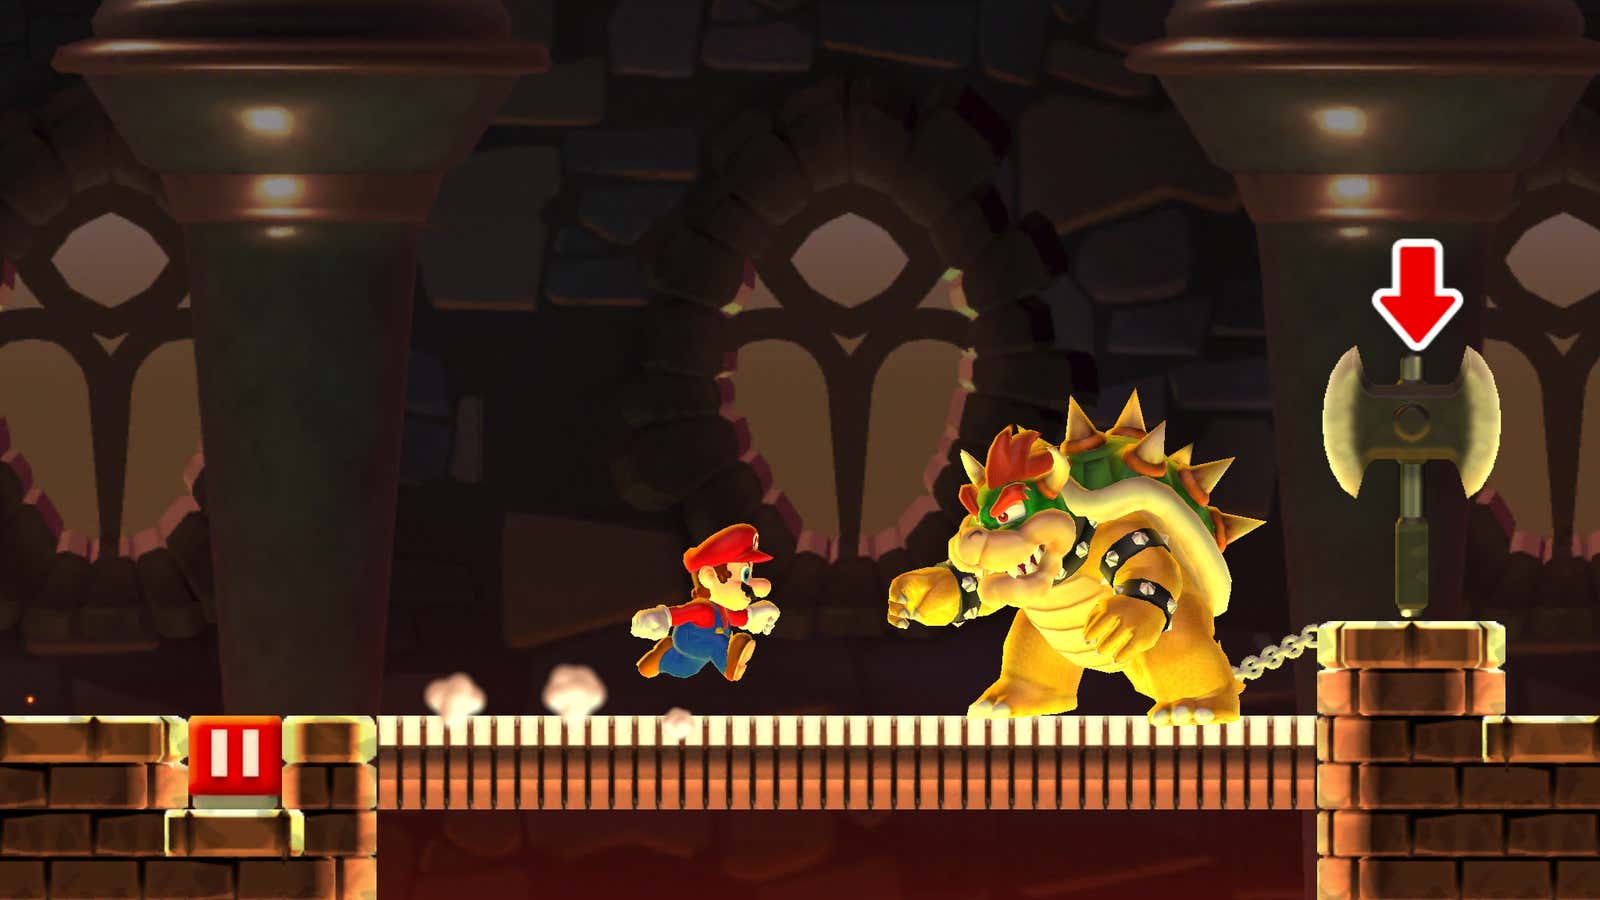 Mario can go underground, but you can’t.